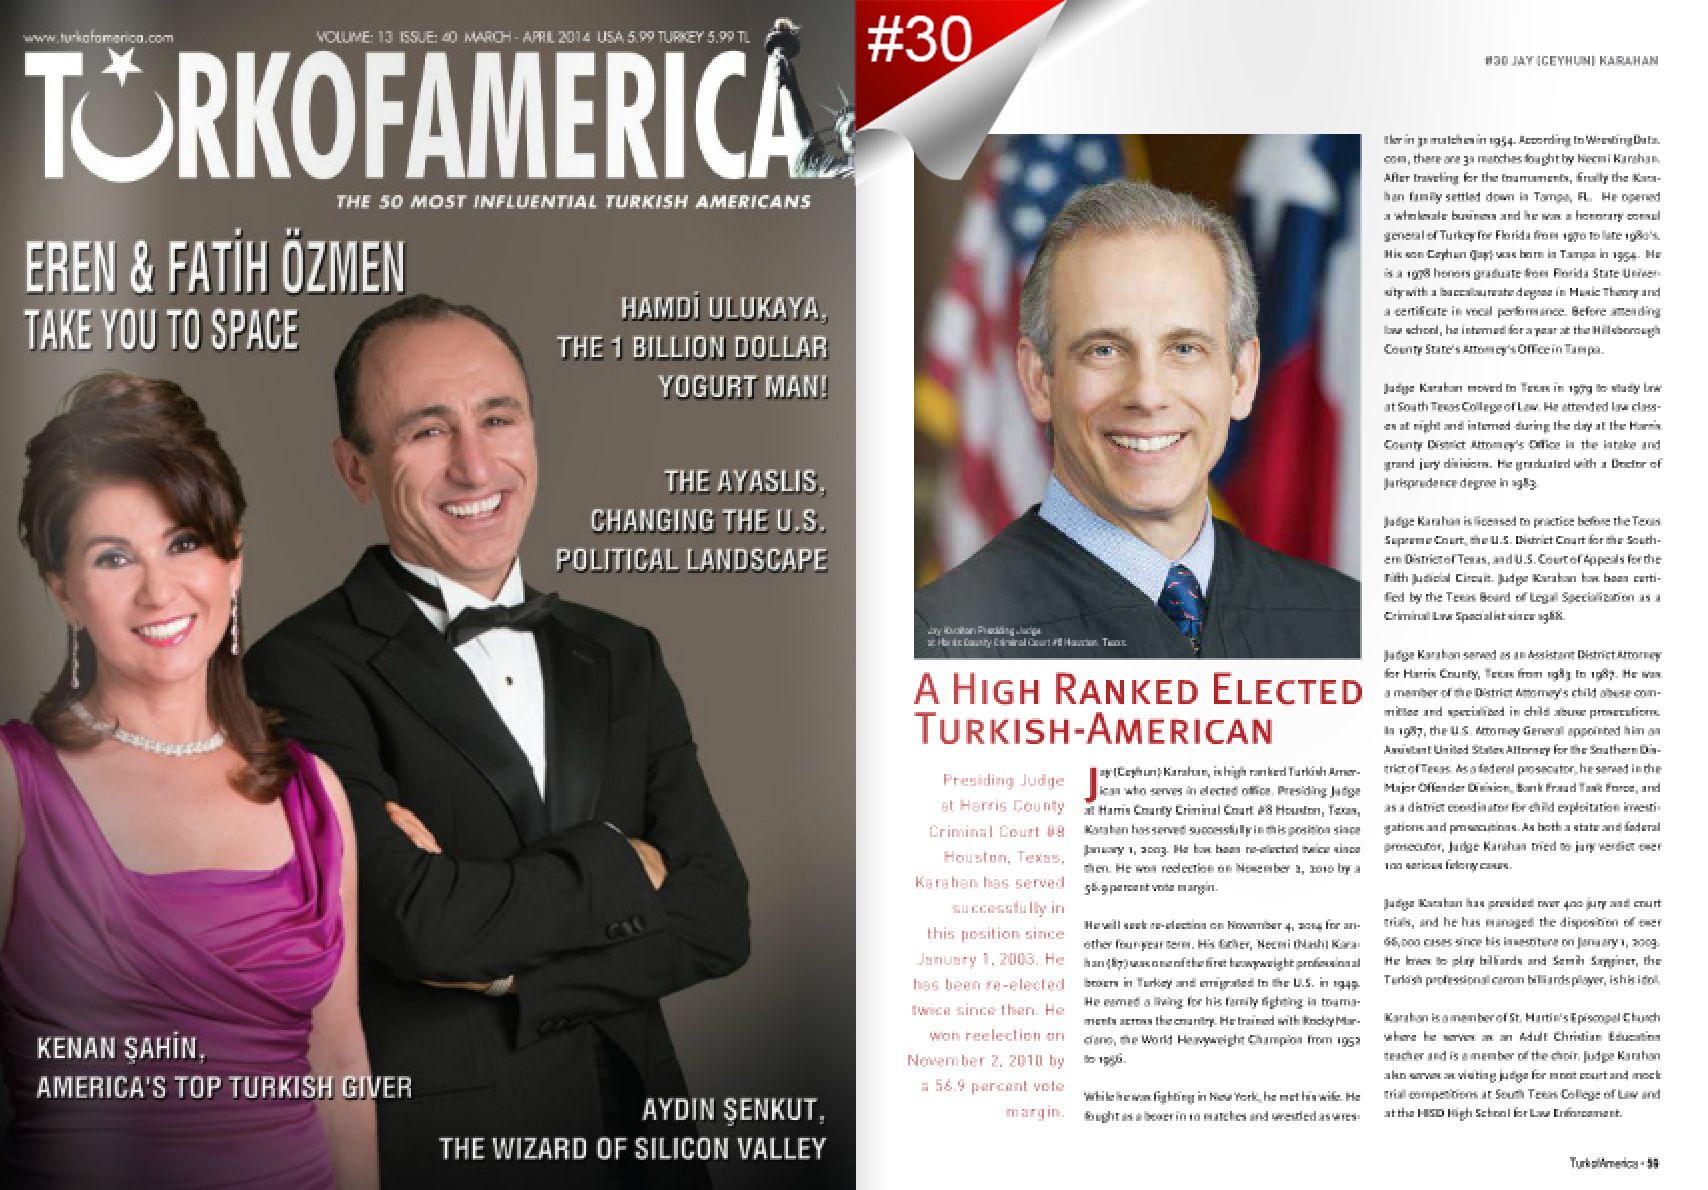 Turk of America Magazine Recognized Judge Jay Karahan Amongst the 50 Most influential Turkish Americans